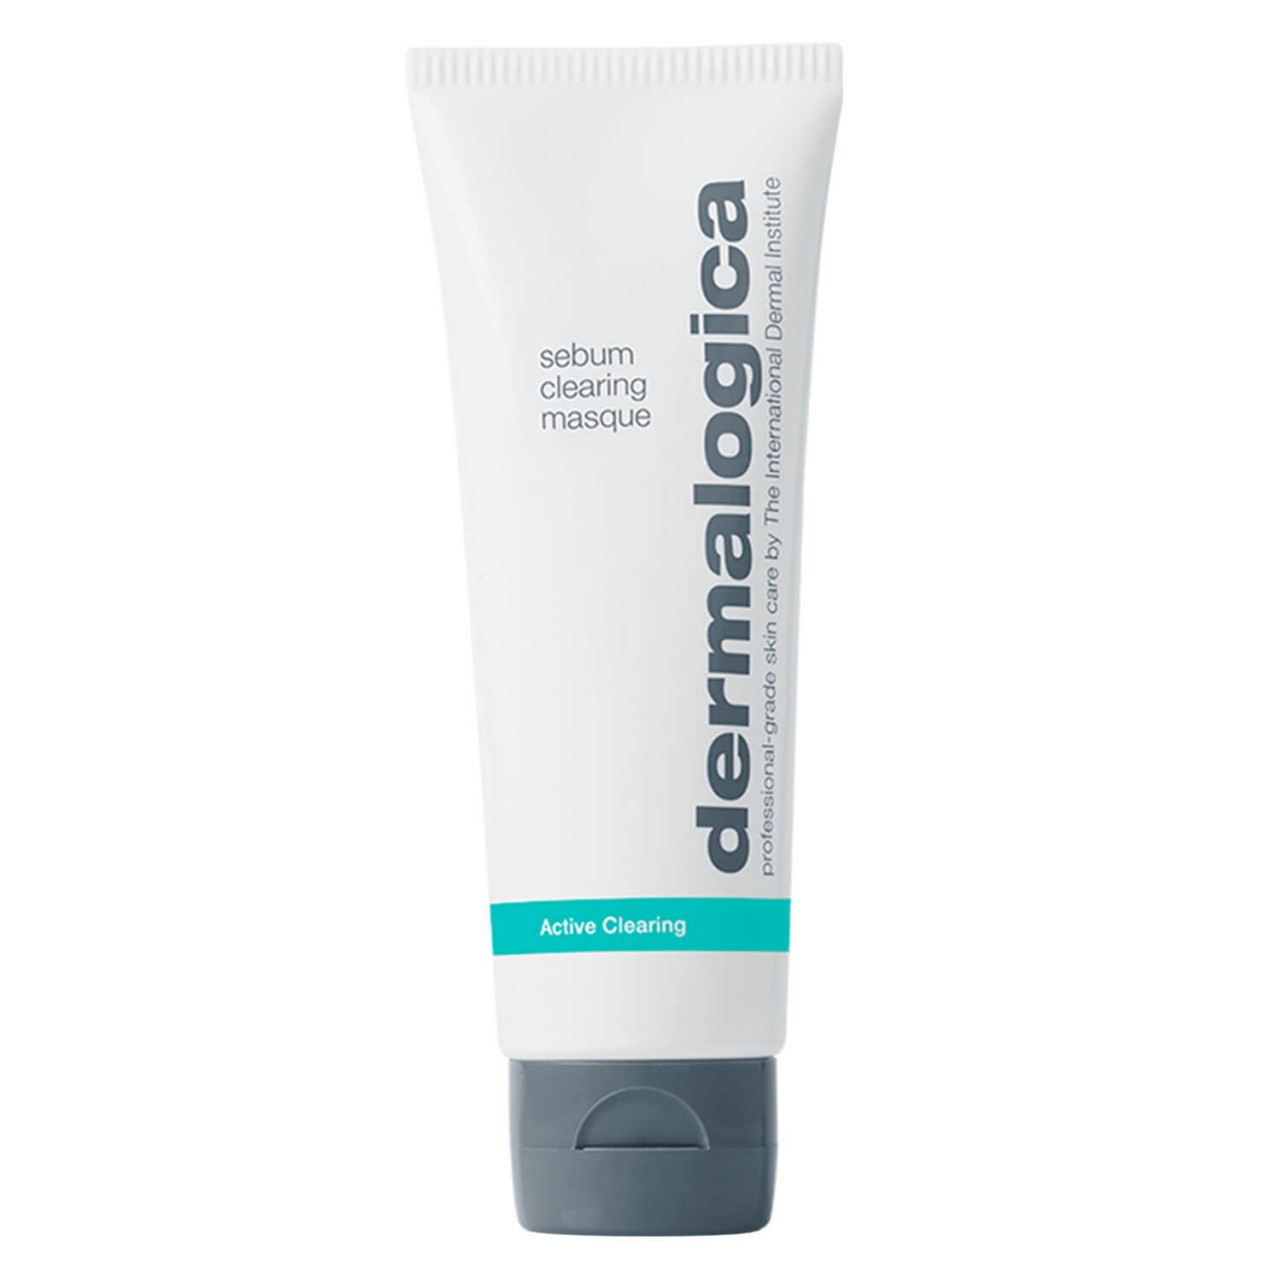 Active Clearing - Sebum Clearing Masque von Dermalogica